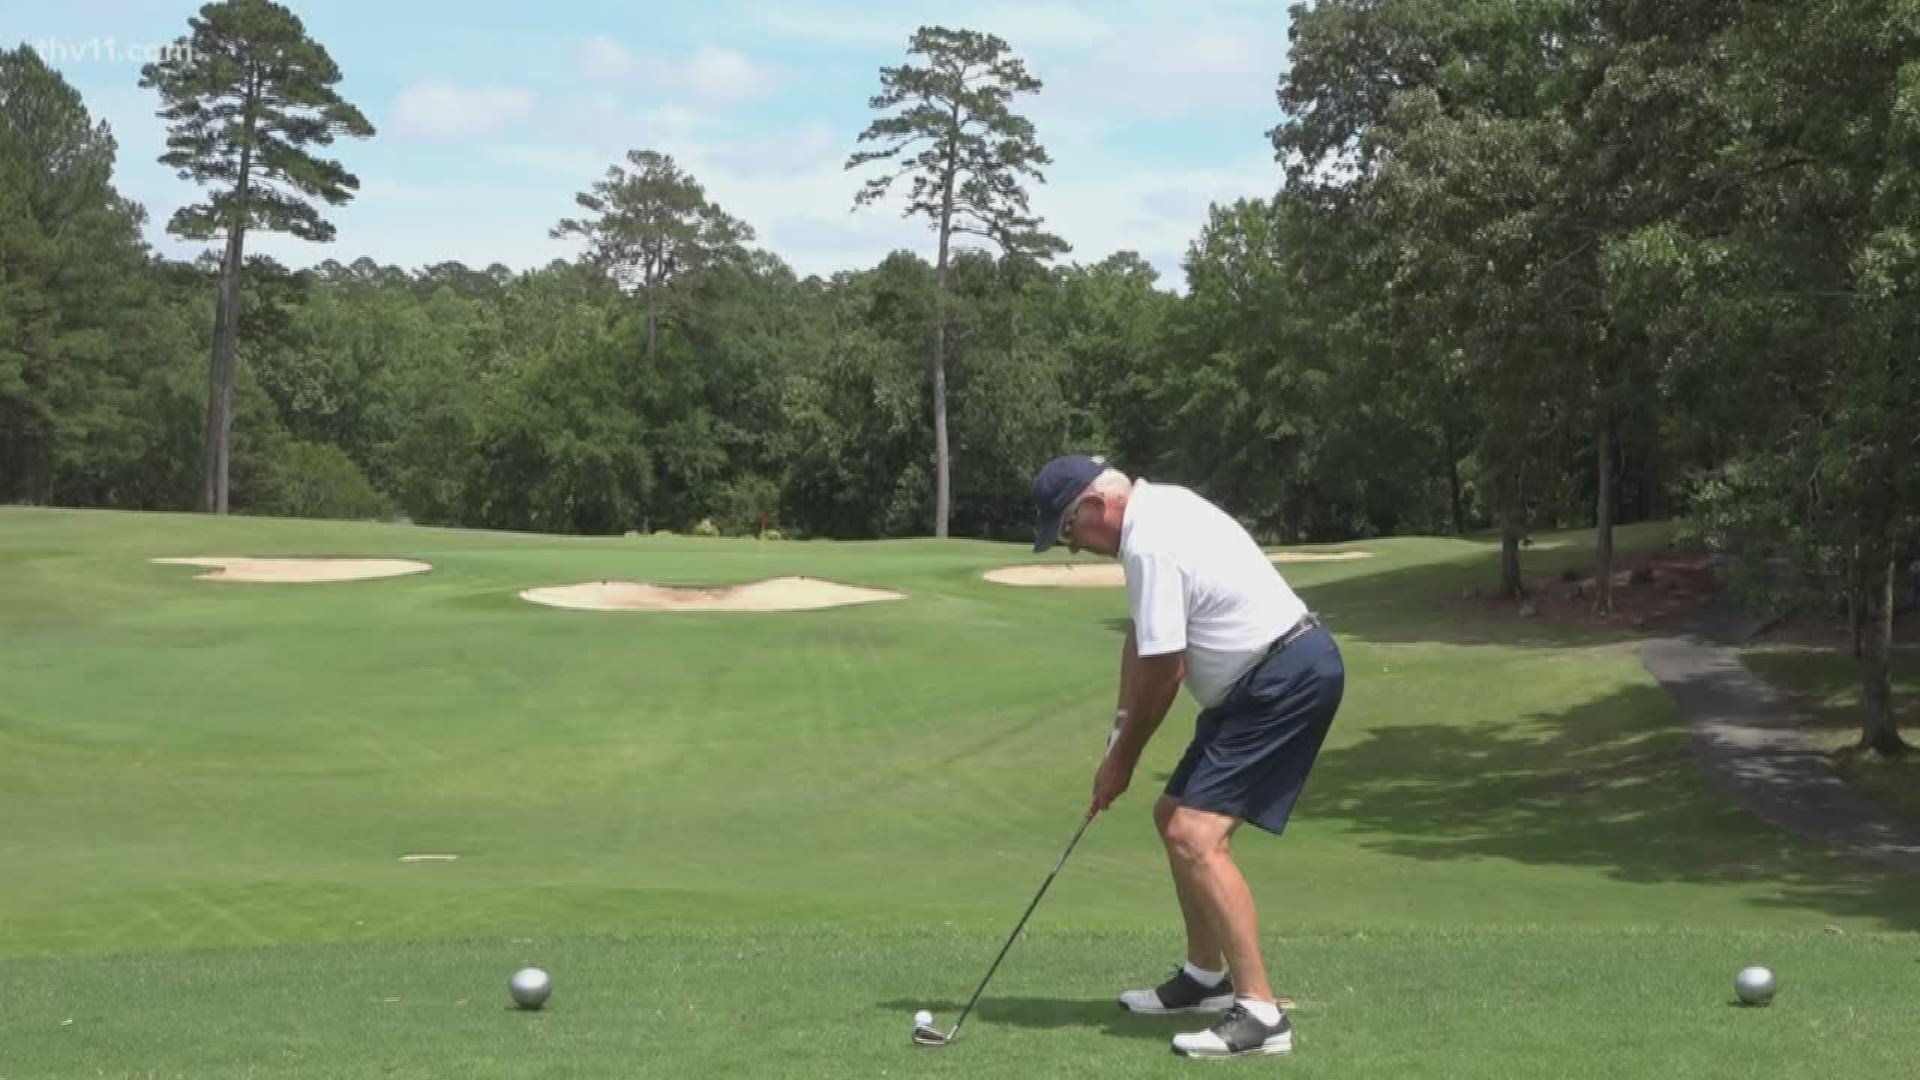 81-year-old sinks two hole-in-ones in single round